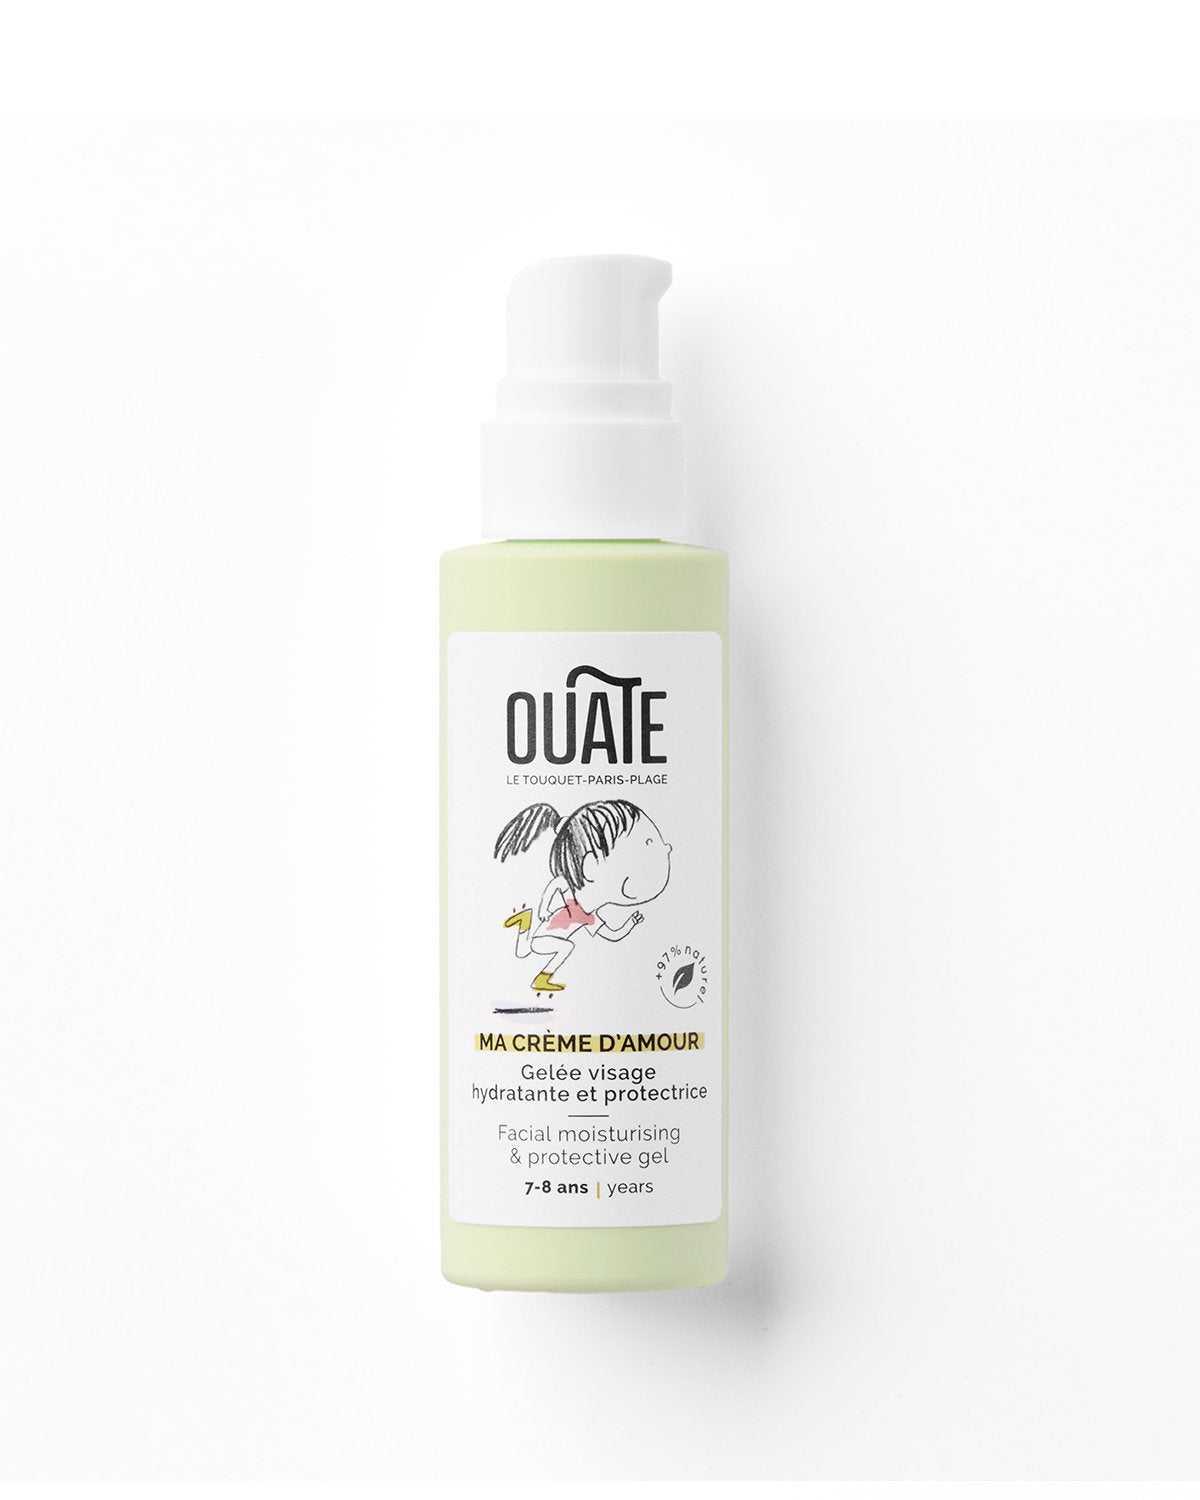 OUATE Duo Set MY LOVABLE SKINCARE ROUTINE Girls (ages 7-8)